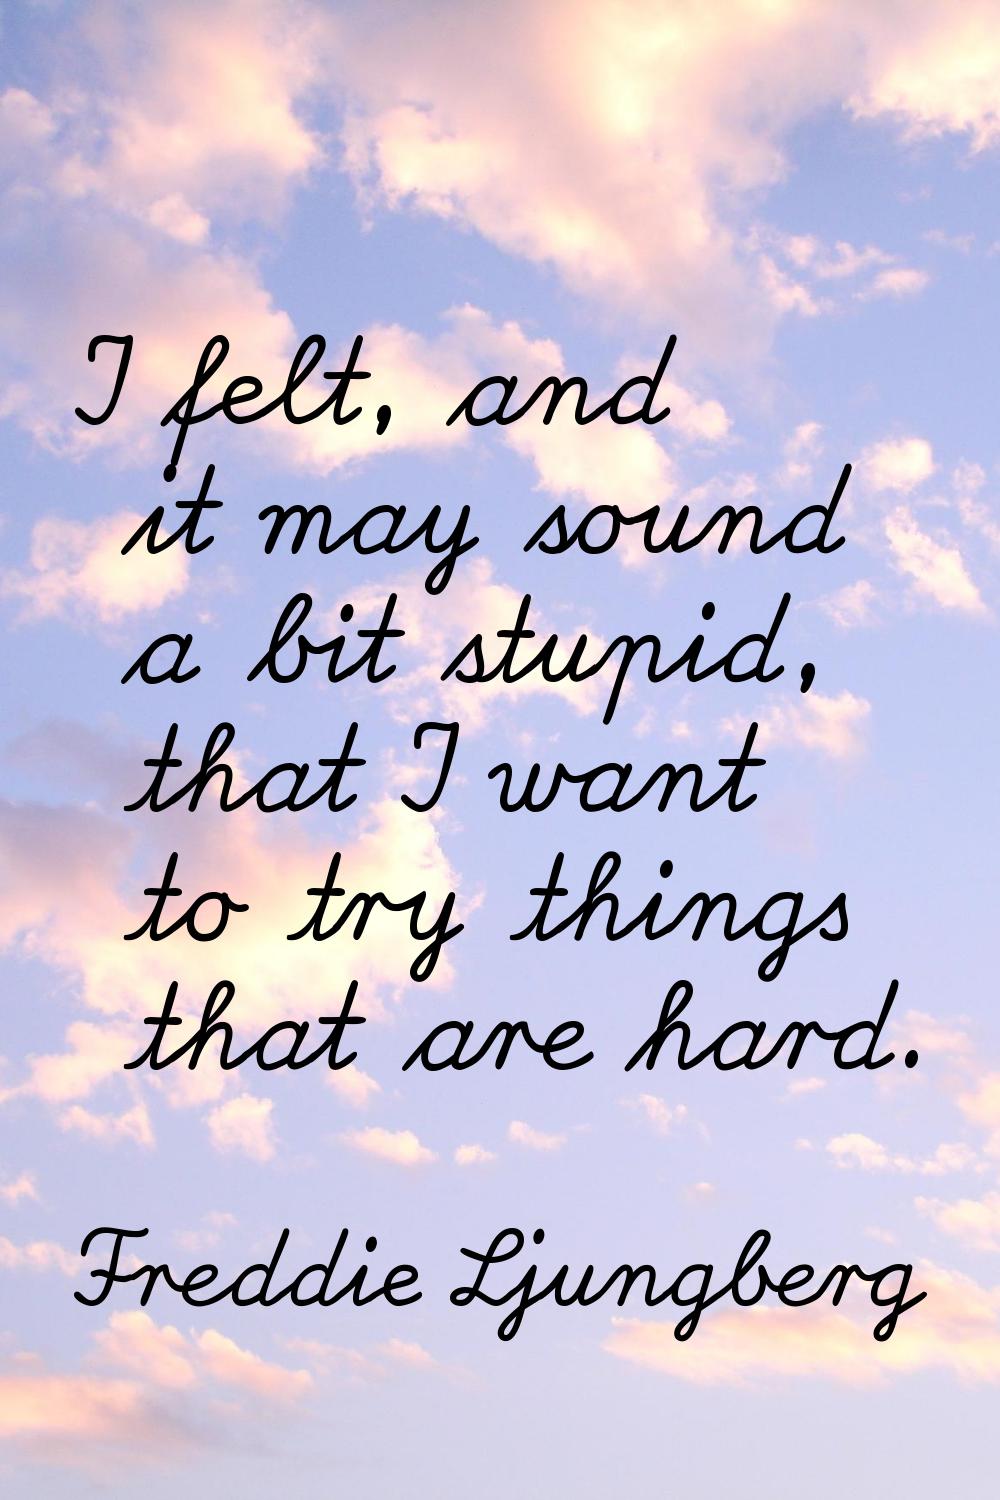 I felt, and it may sound a bit stupid, that I want to try things that are hard.